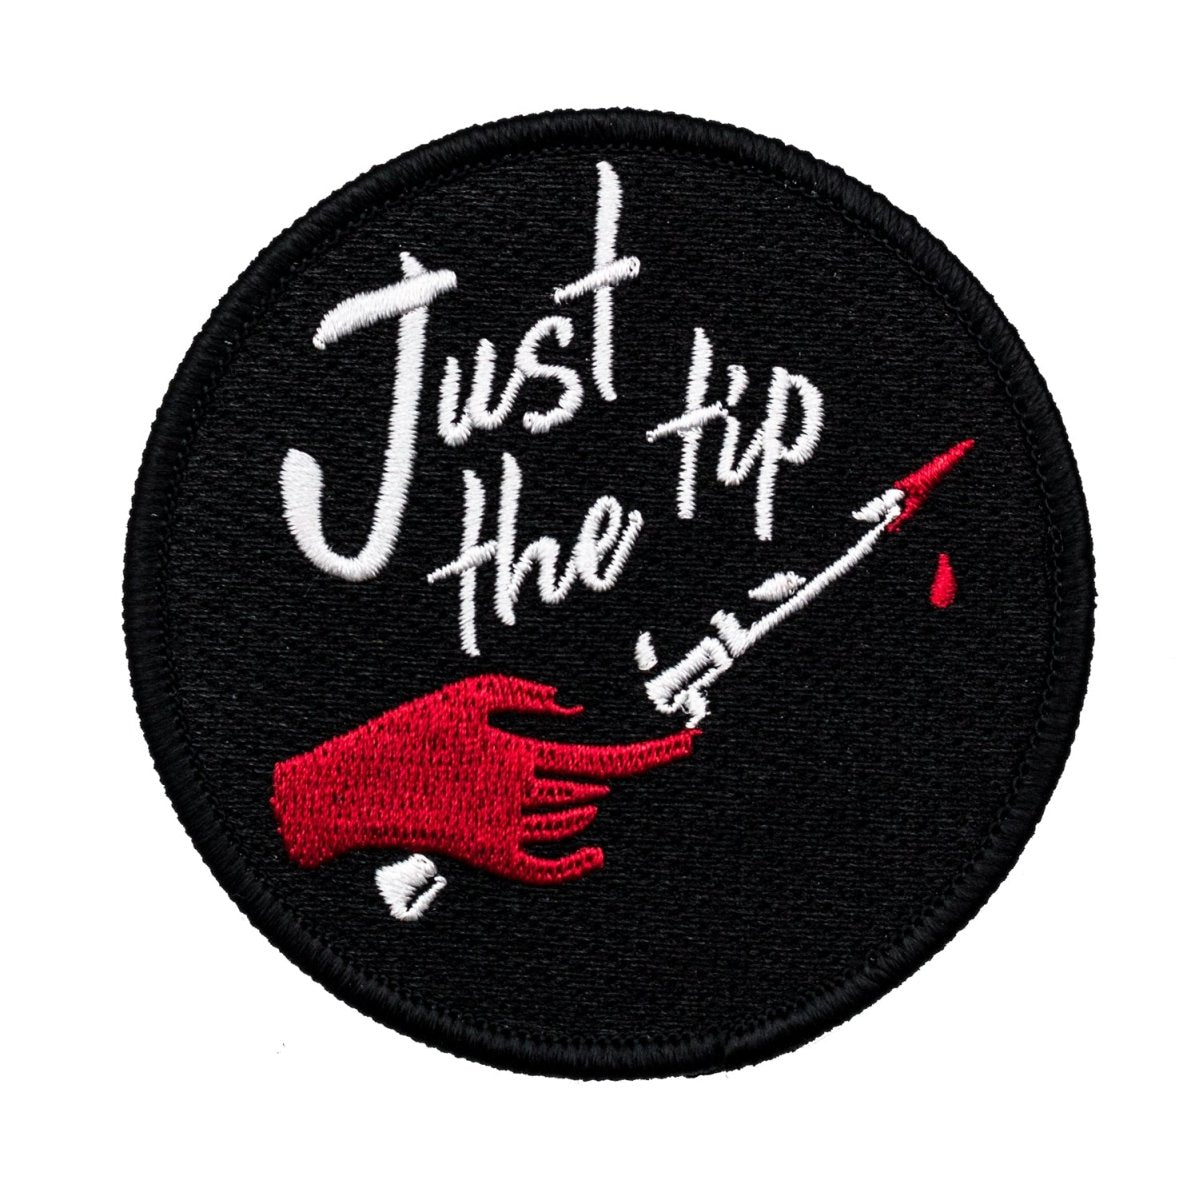 Just The Tip Patch - Patch - Pretty Bad Co.